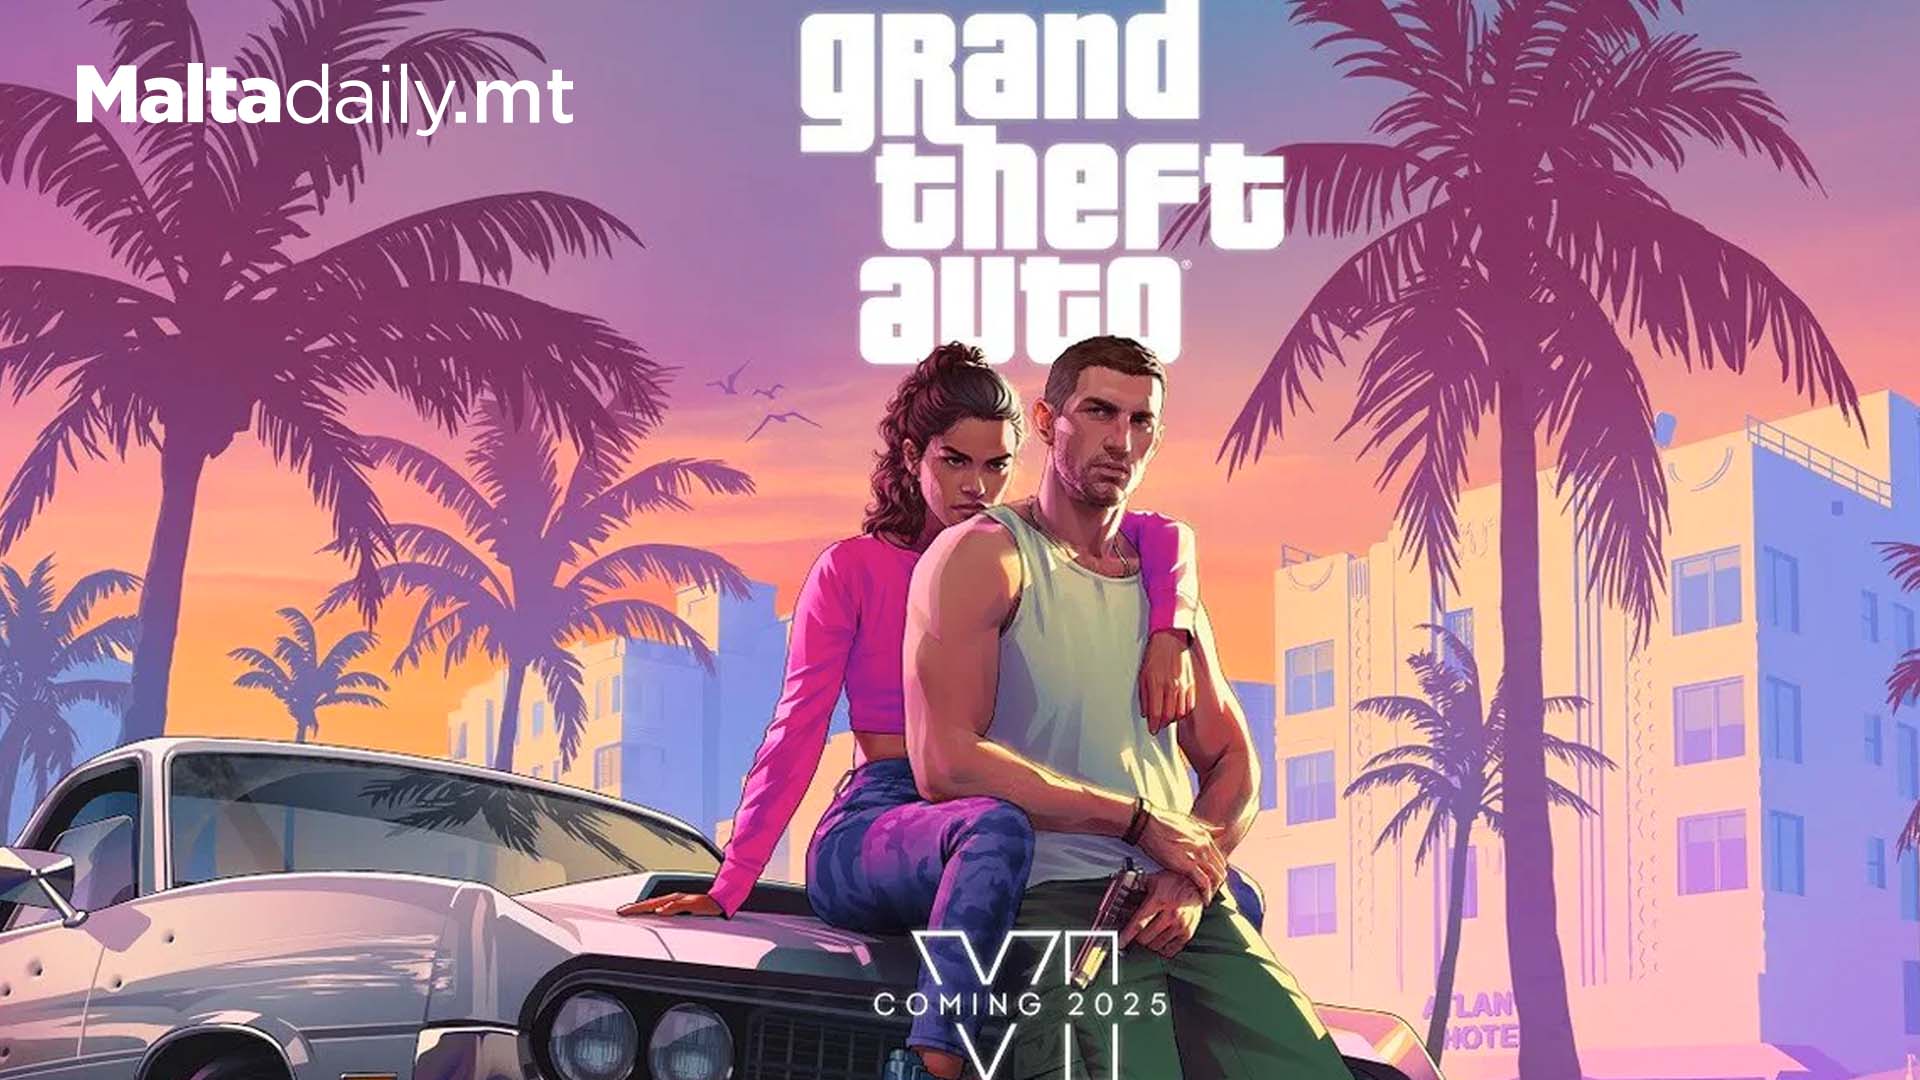 GTA6 Trailer Released To Over 1 Million Views In 7 Hours